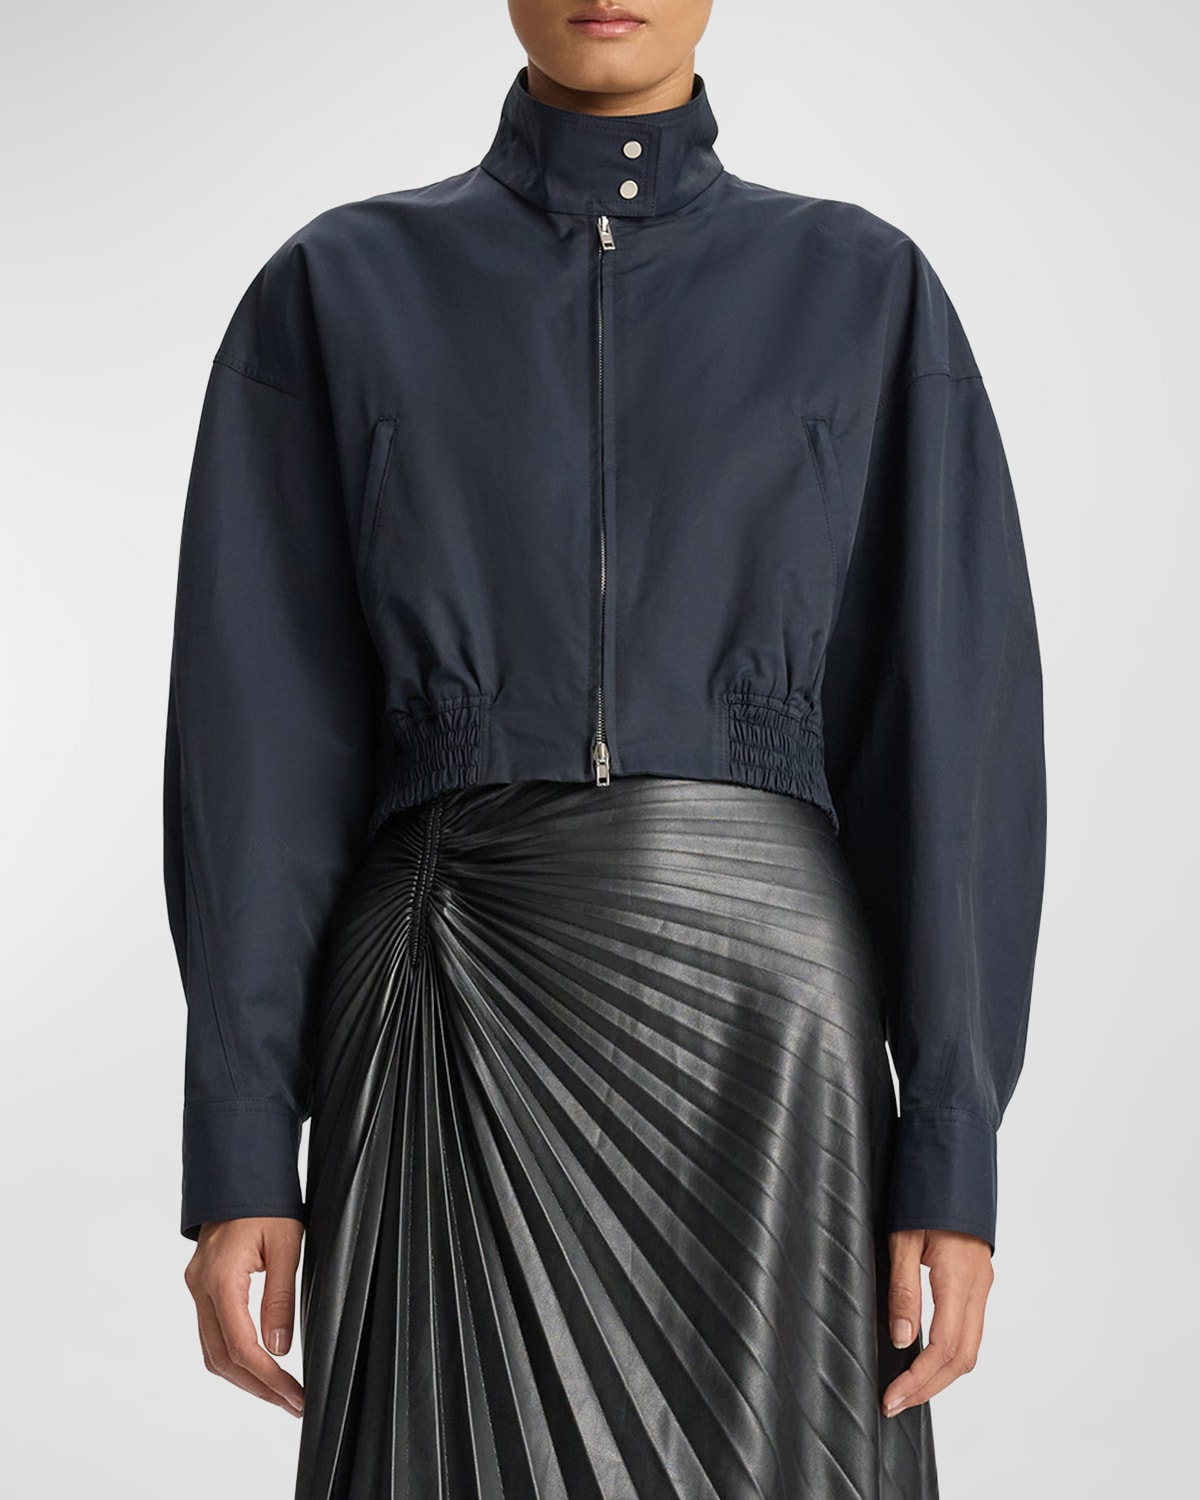 A.l.c Elliot Cropped Bomber Jacket In Navy